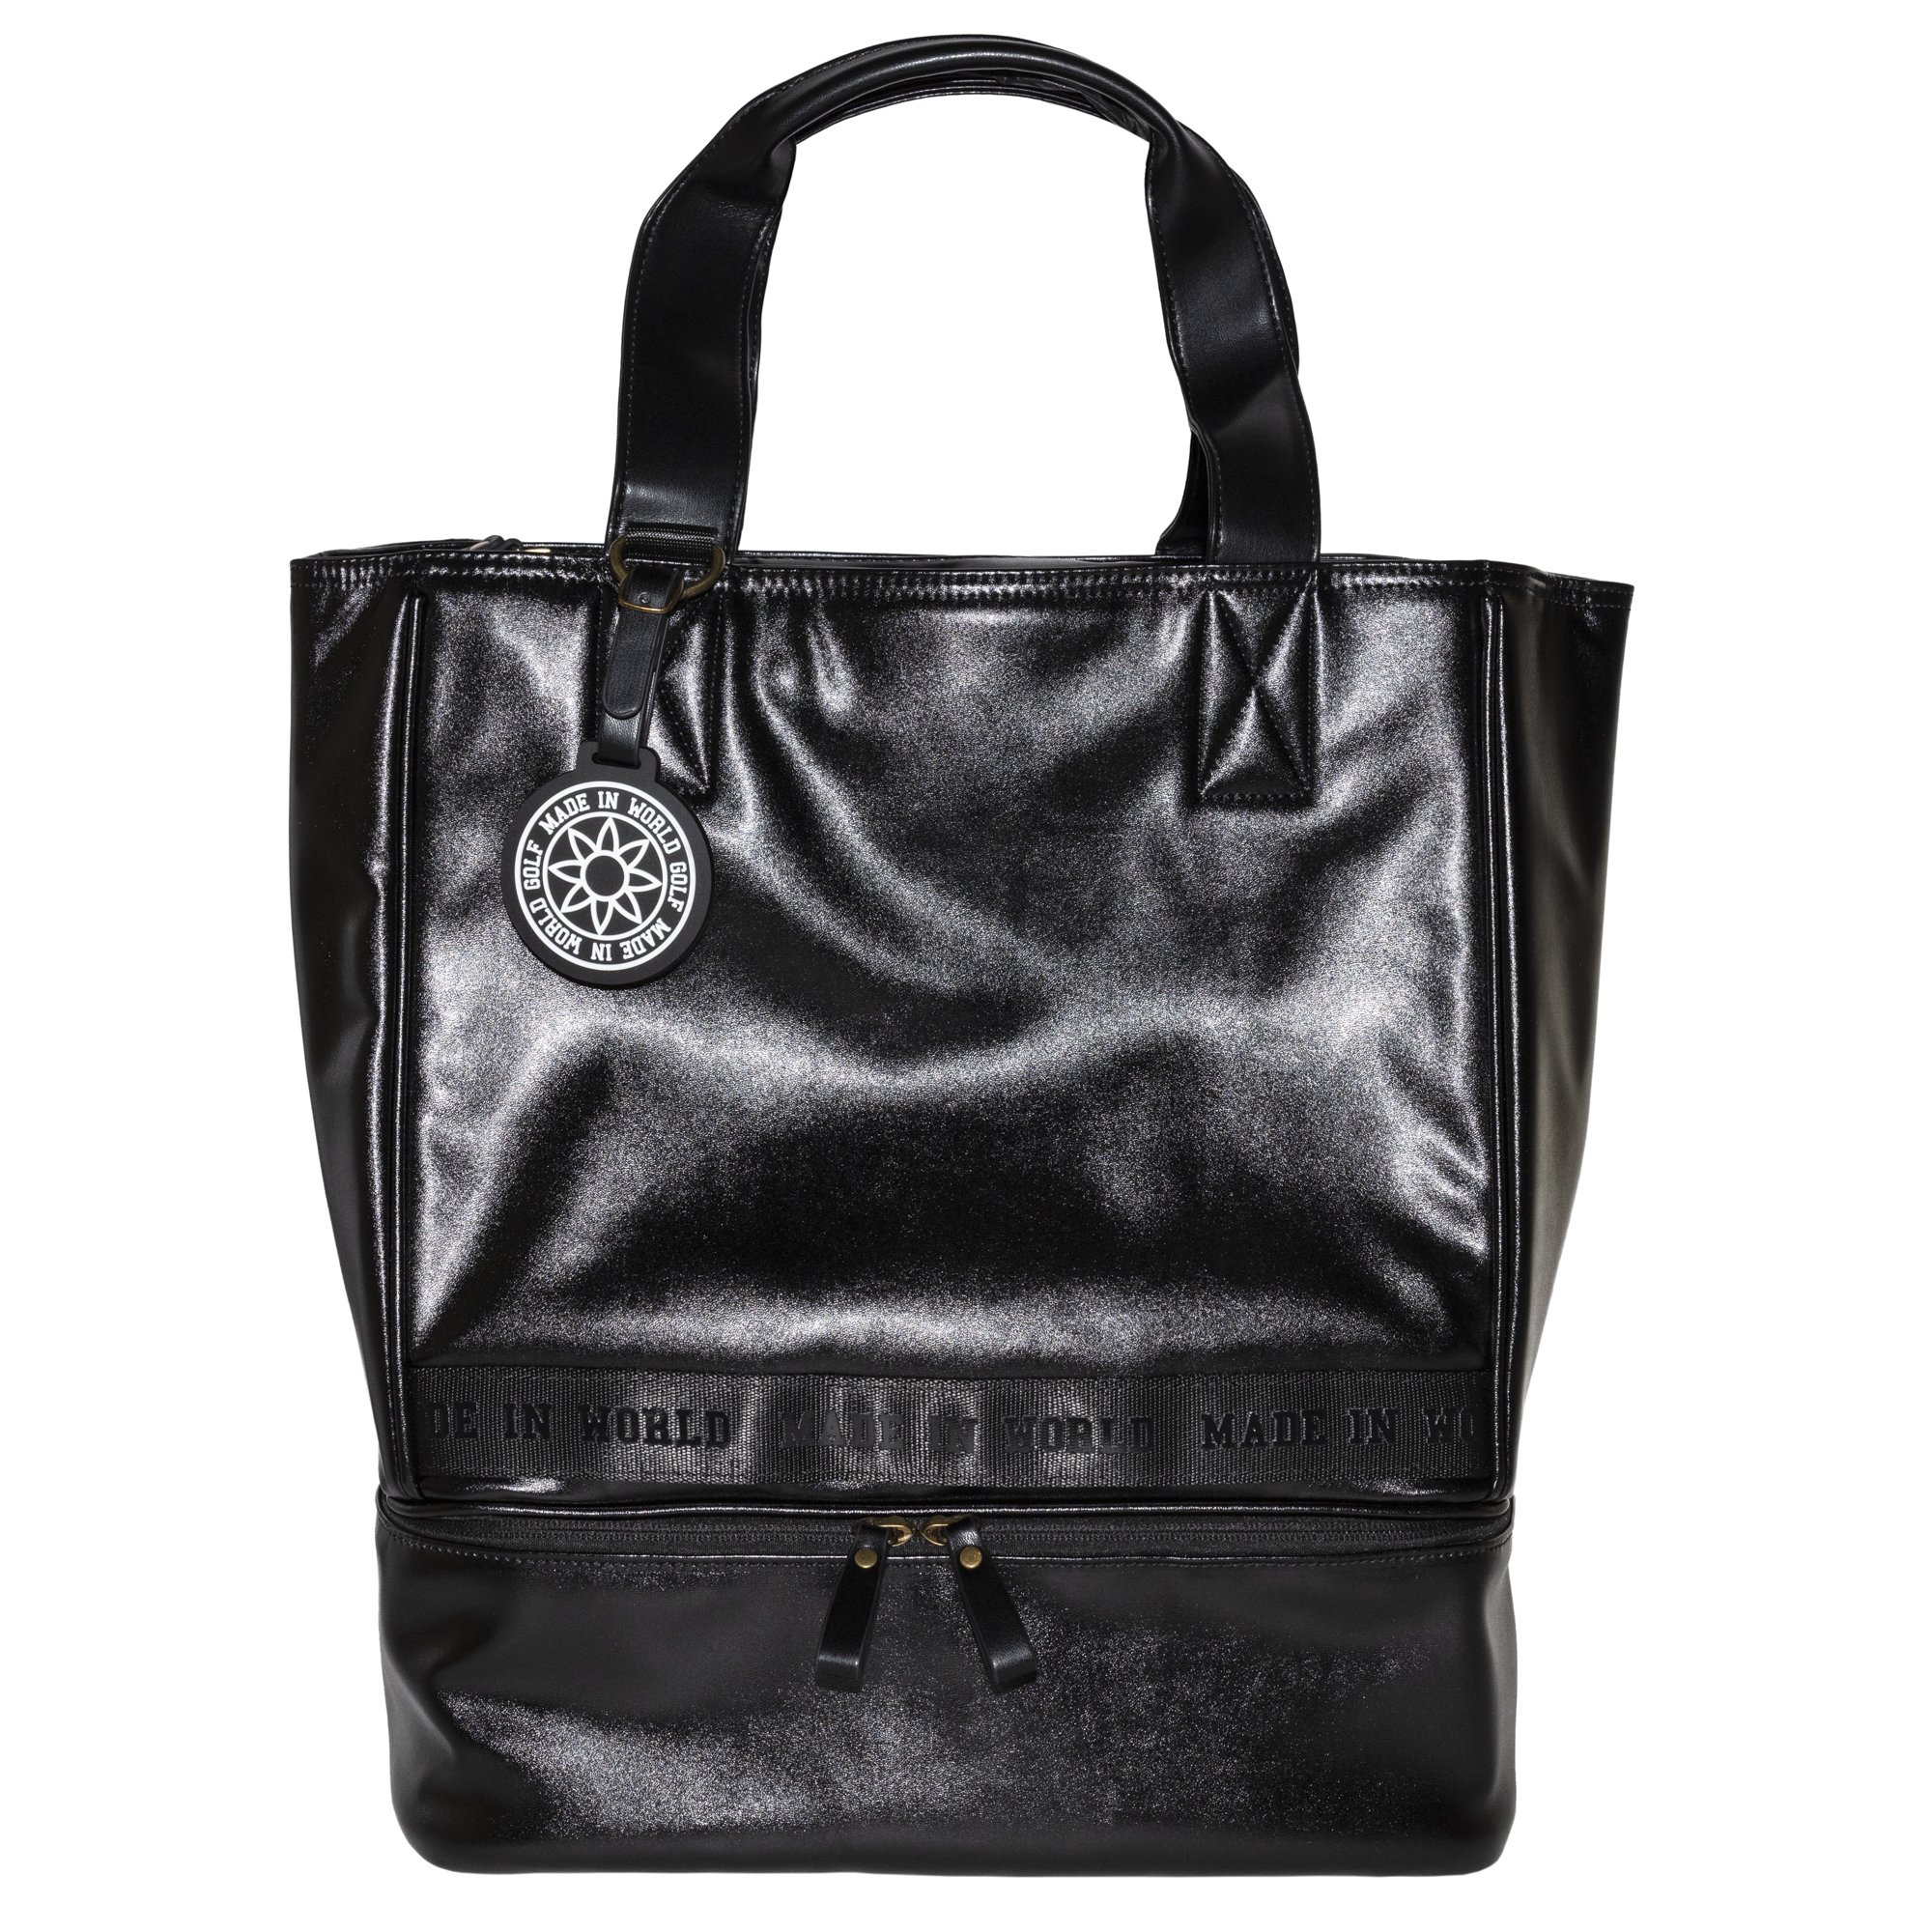 <img class='new_mark_img1' src='https://img.shop-pro.jp/img/new/icons14.gif' style='border:none;display:inline;margin:0px;padding:0px;width:auto;' />TOTE BAG<br />BLACK